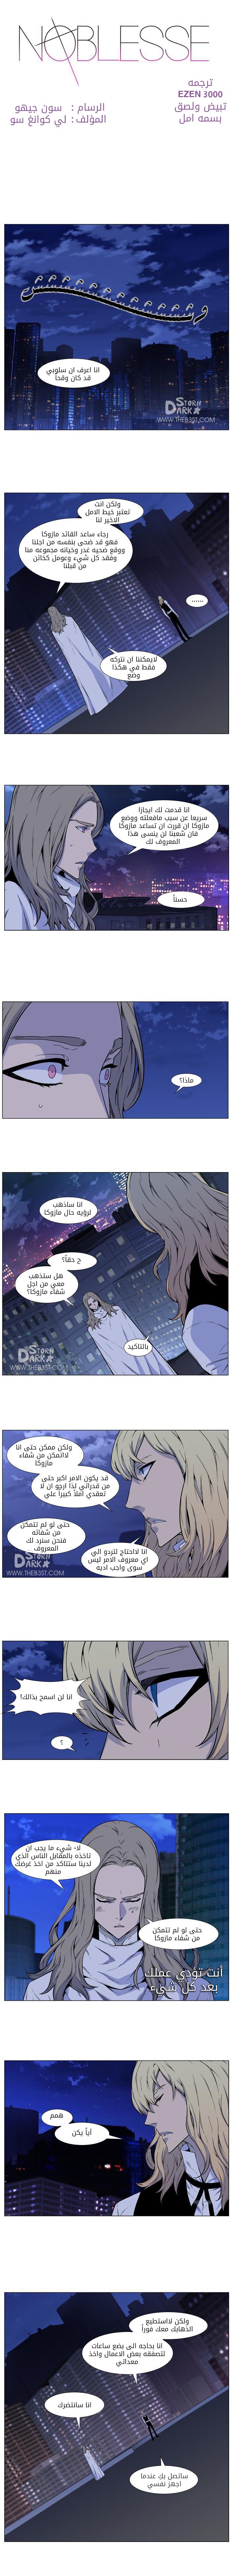 Noblesse: Chapter 486 - Page 1